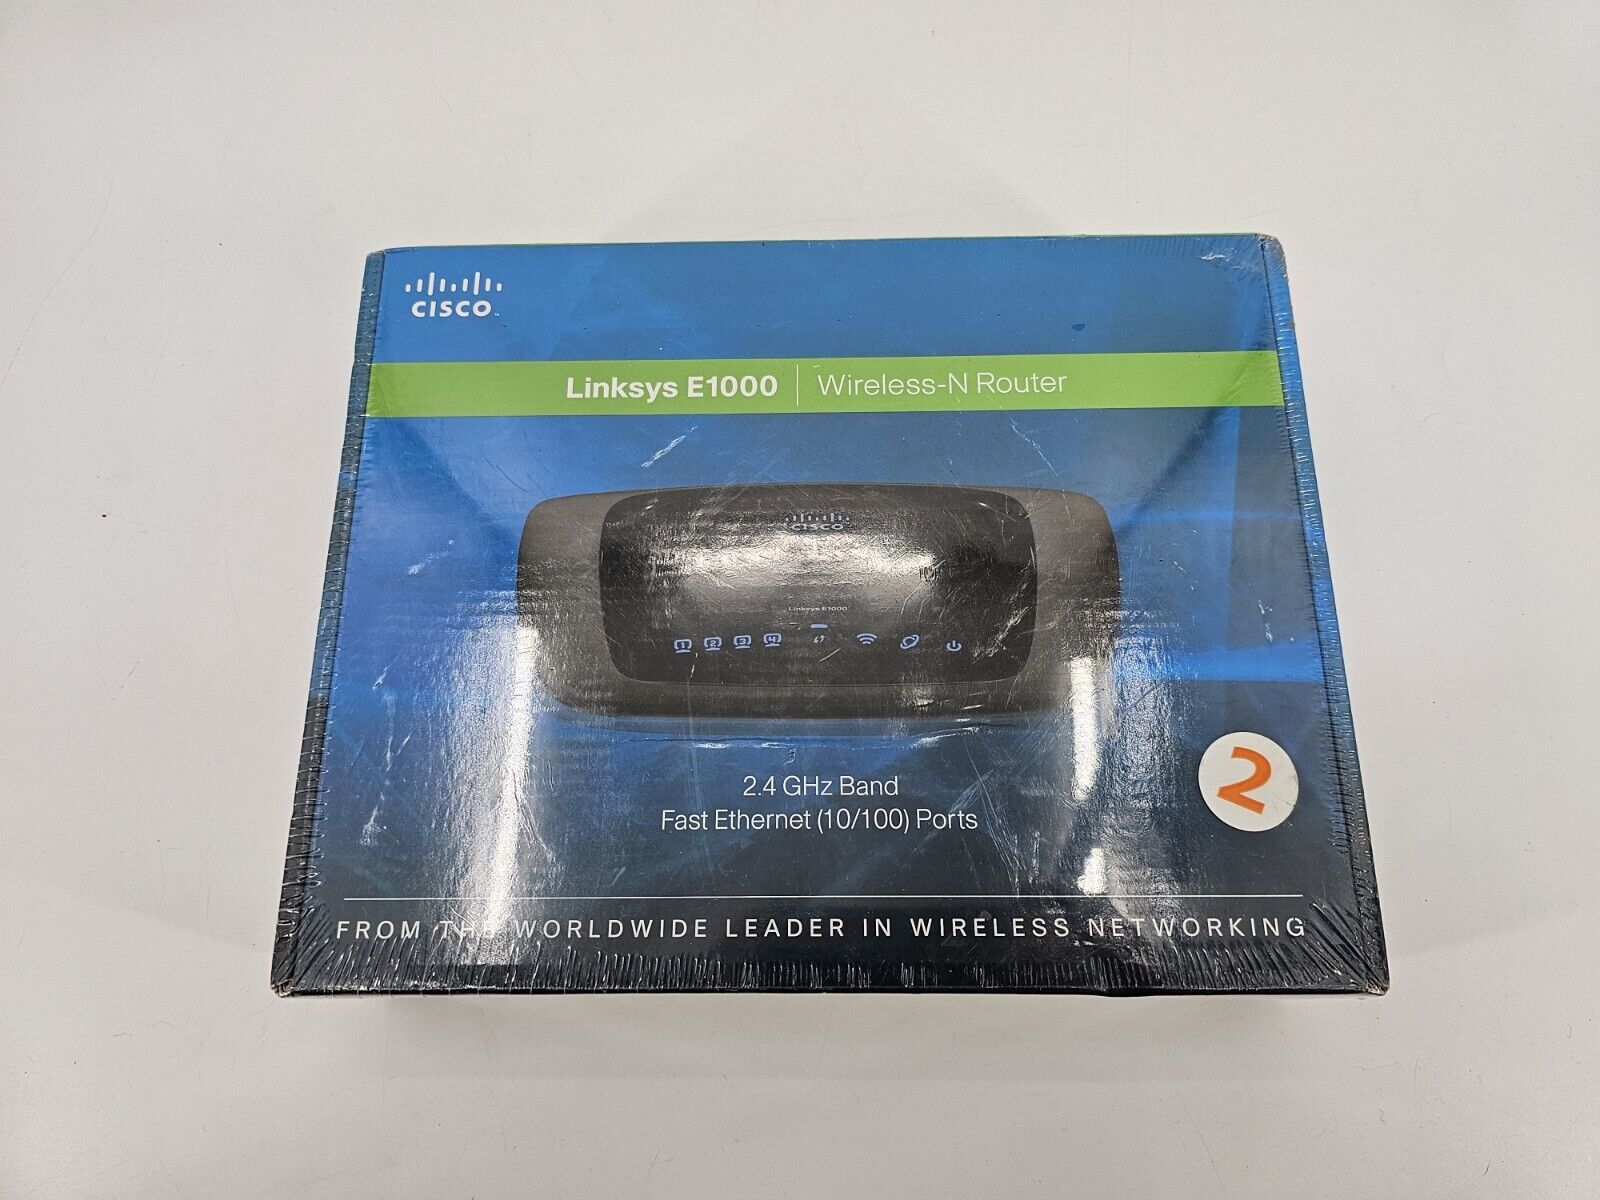 Cisco LInksys E1000 Wireless-N Router 300 Mbps Wi-Fi LAN 2.4 GHz Band New Sealed